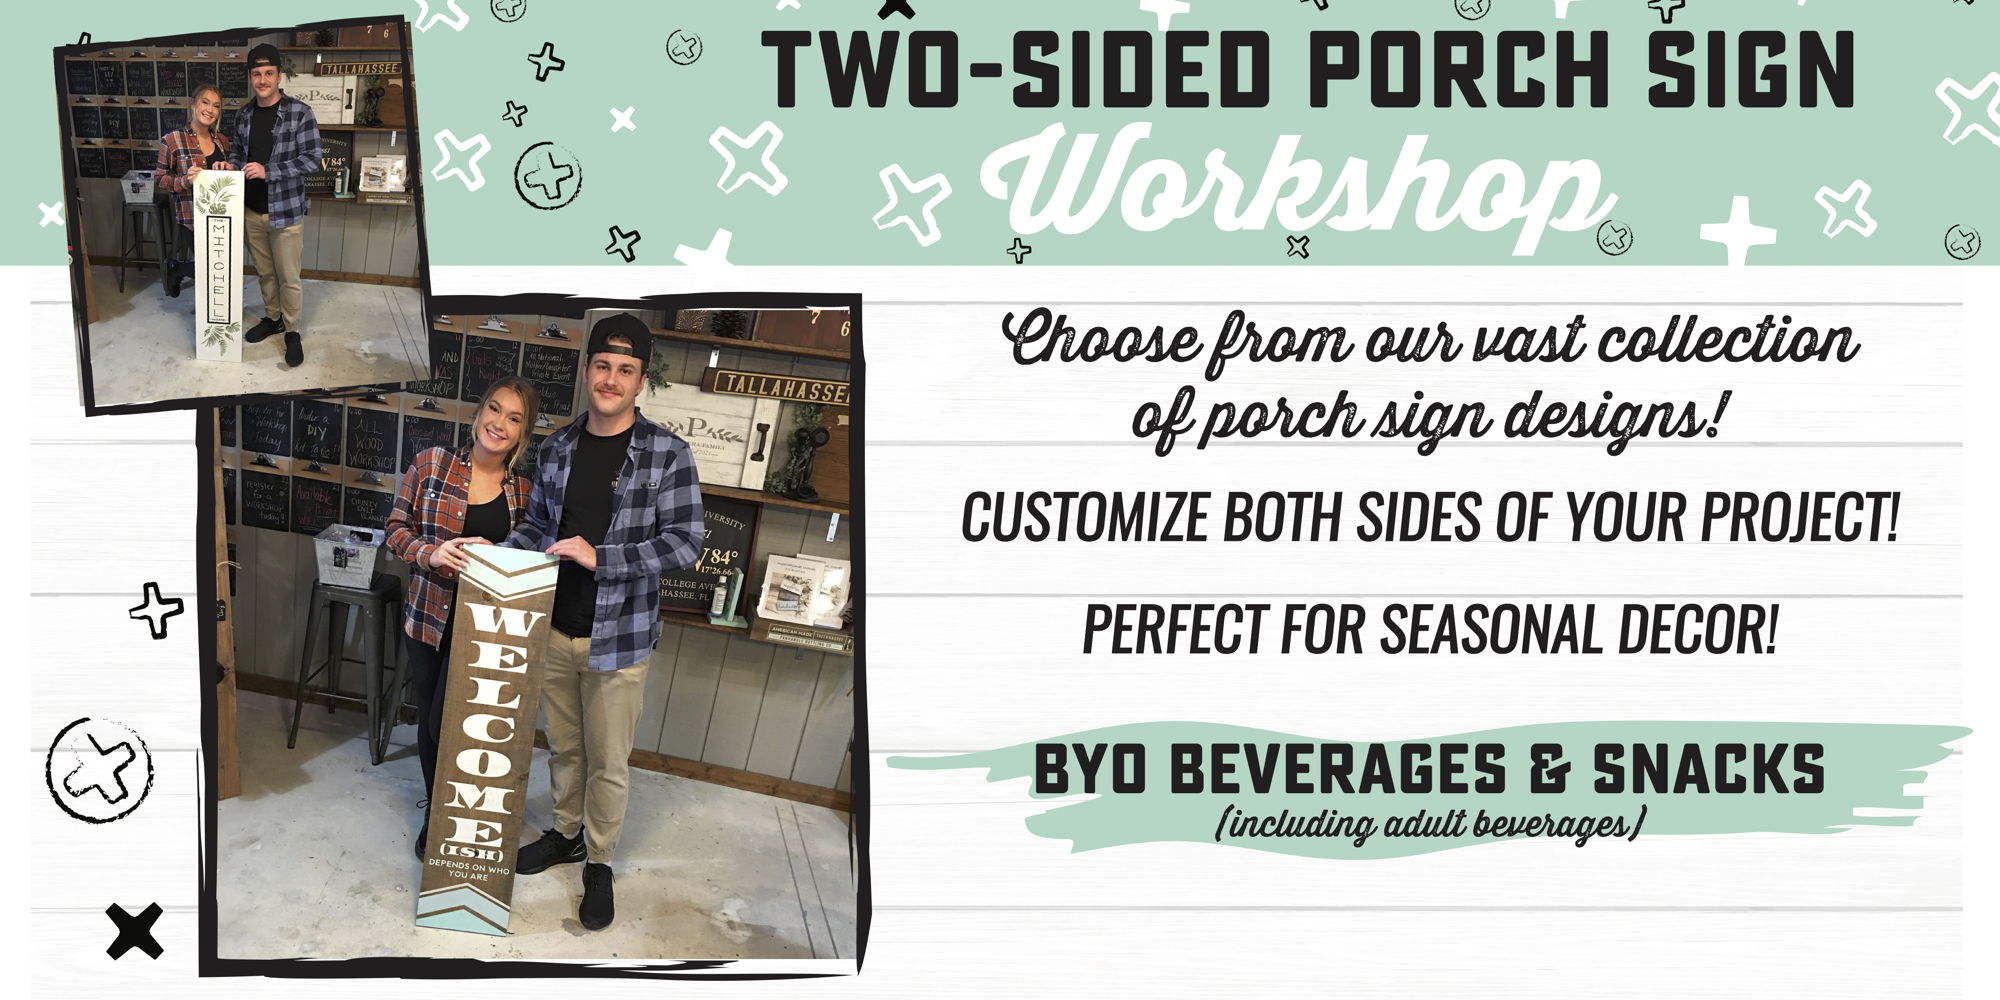 Specialty - Two-Sided Porch Sign Workshop! promotional image